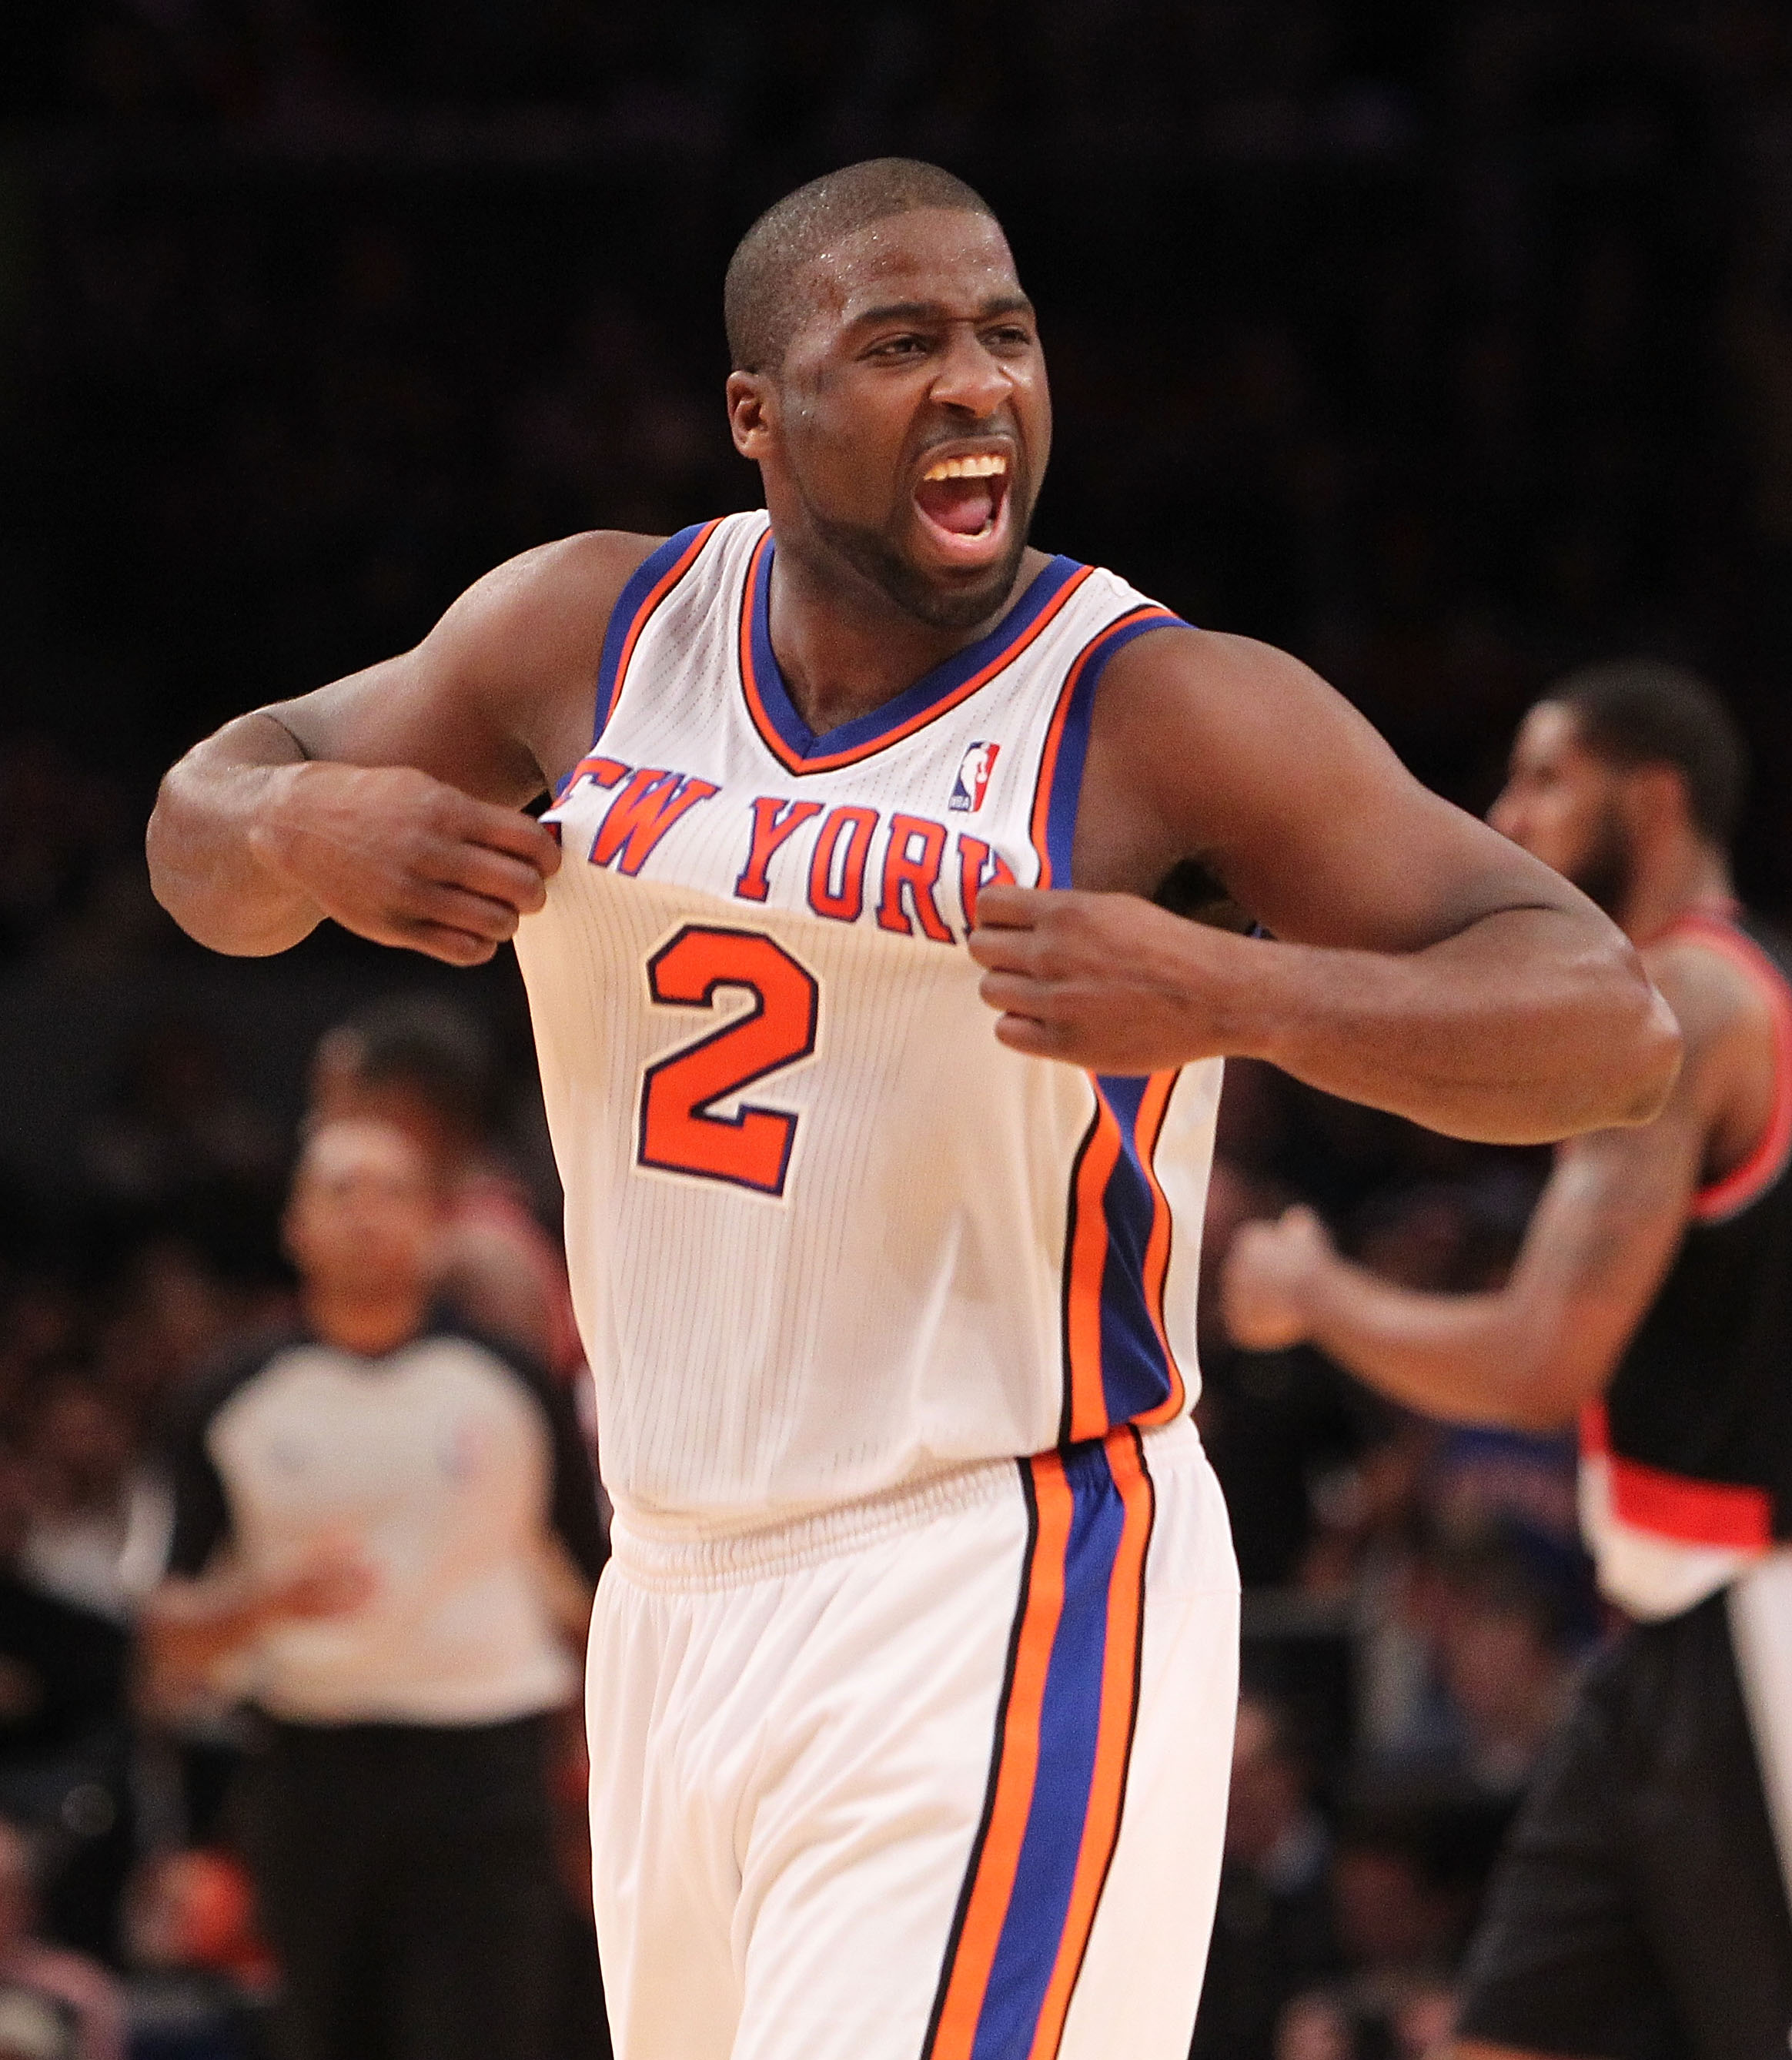 NEW YORK - OCTOBER 30:  Raymond Felton #2 of the New York Knicks celebrates a basket agaisnt the Portland Trail Blazers at Madison Square Garden on October 30, 2010 in New York City. NOTE TO USER: User expressly acknowledges and agrees that, by downloadin